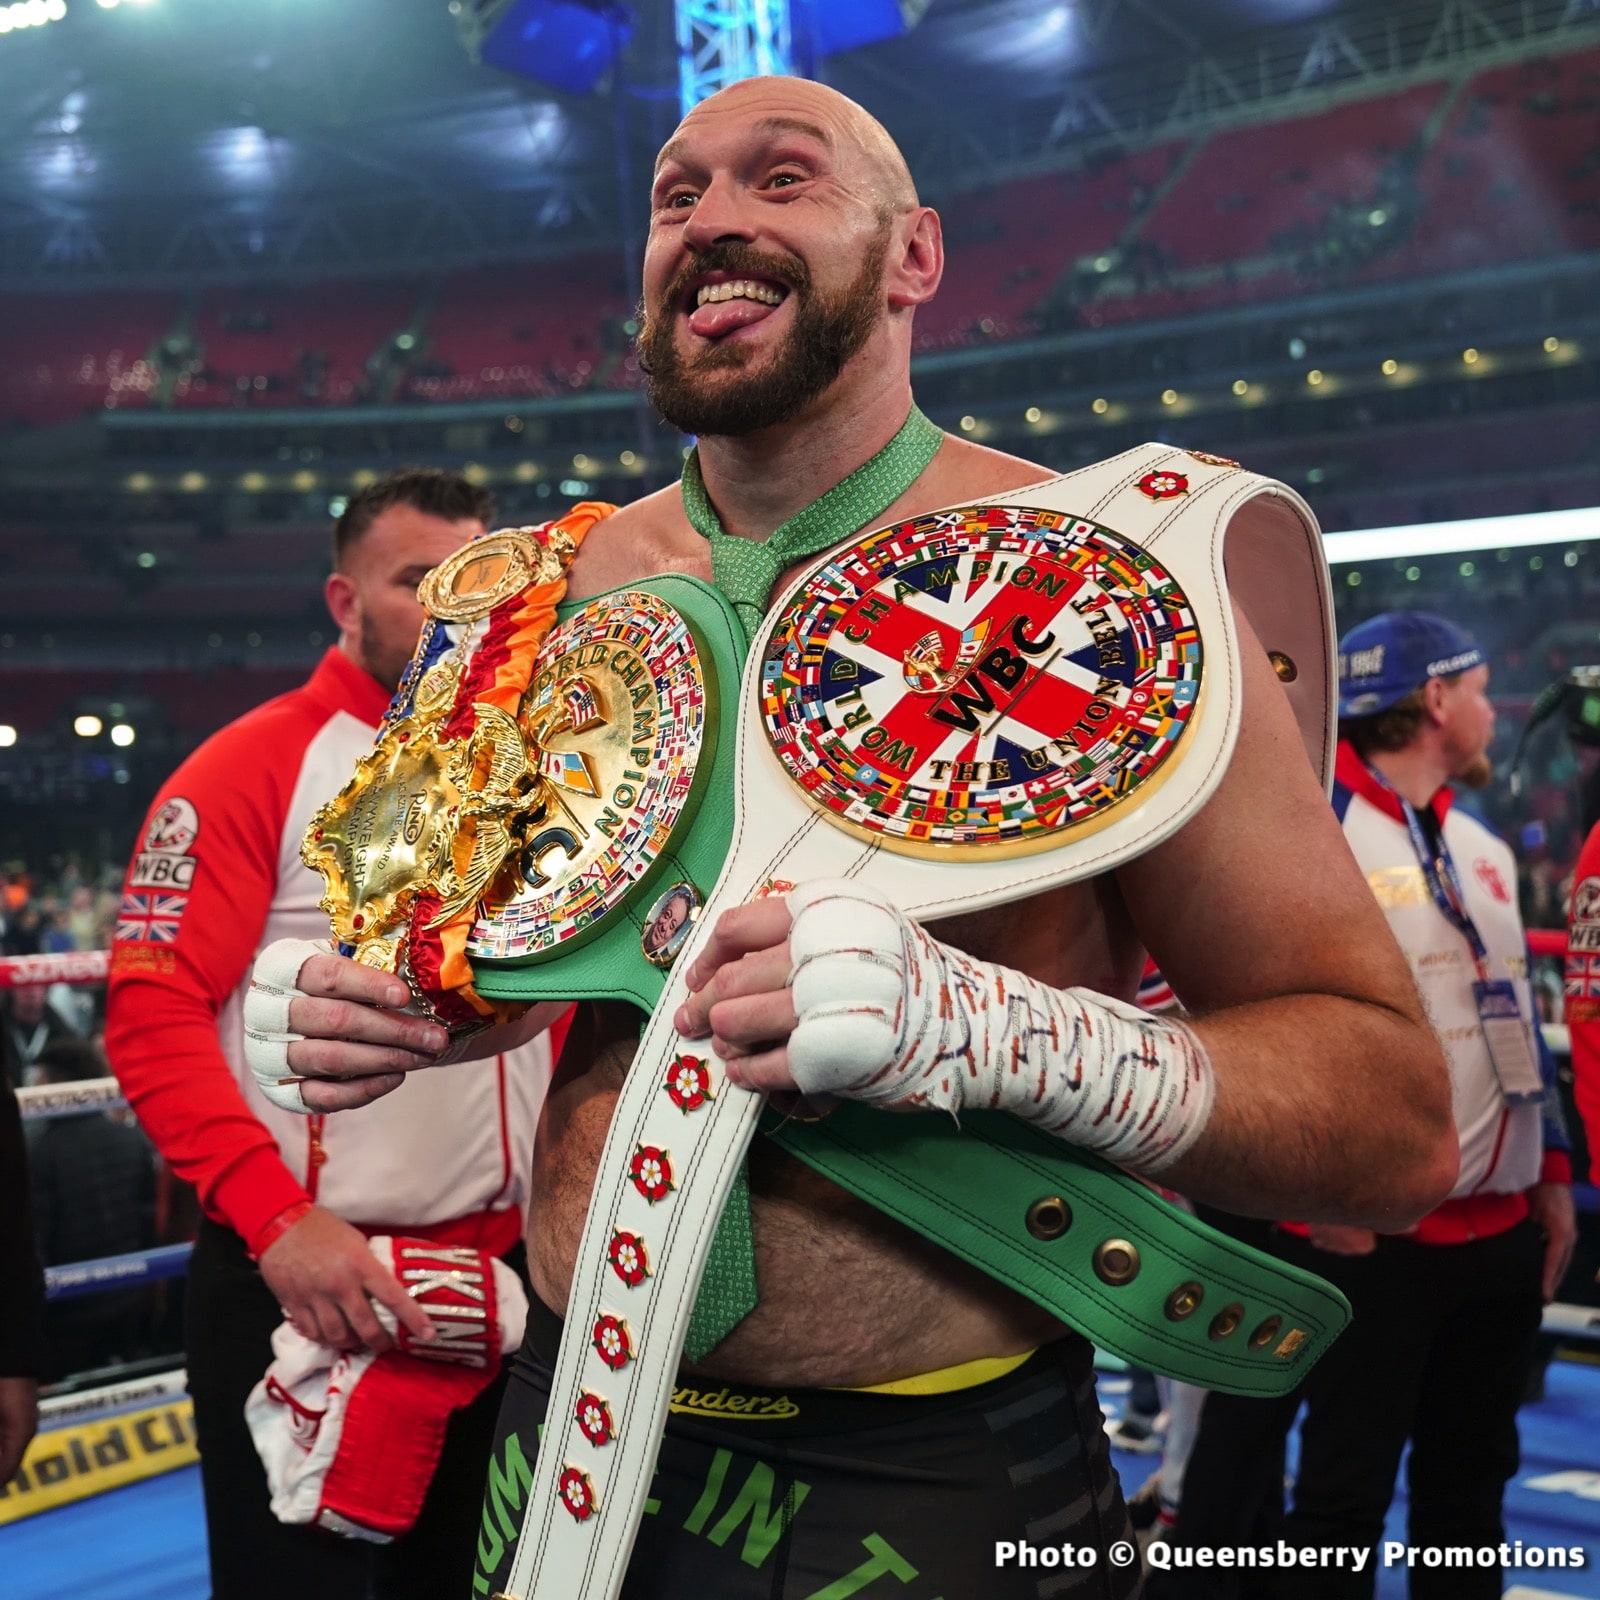 Tyson Fury Insists He Is Retired, But Wants To Fight Exhibition Bouts With “Big Names”